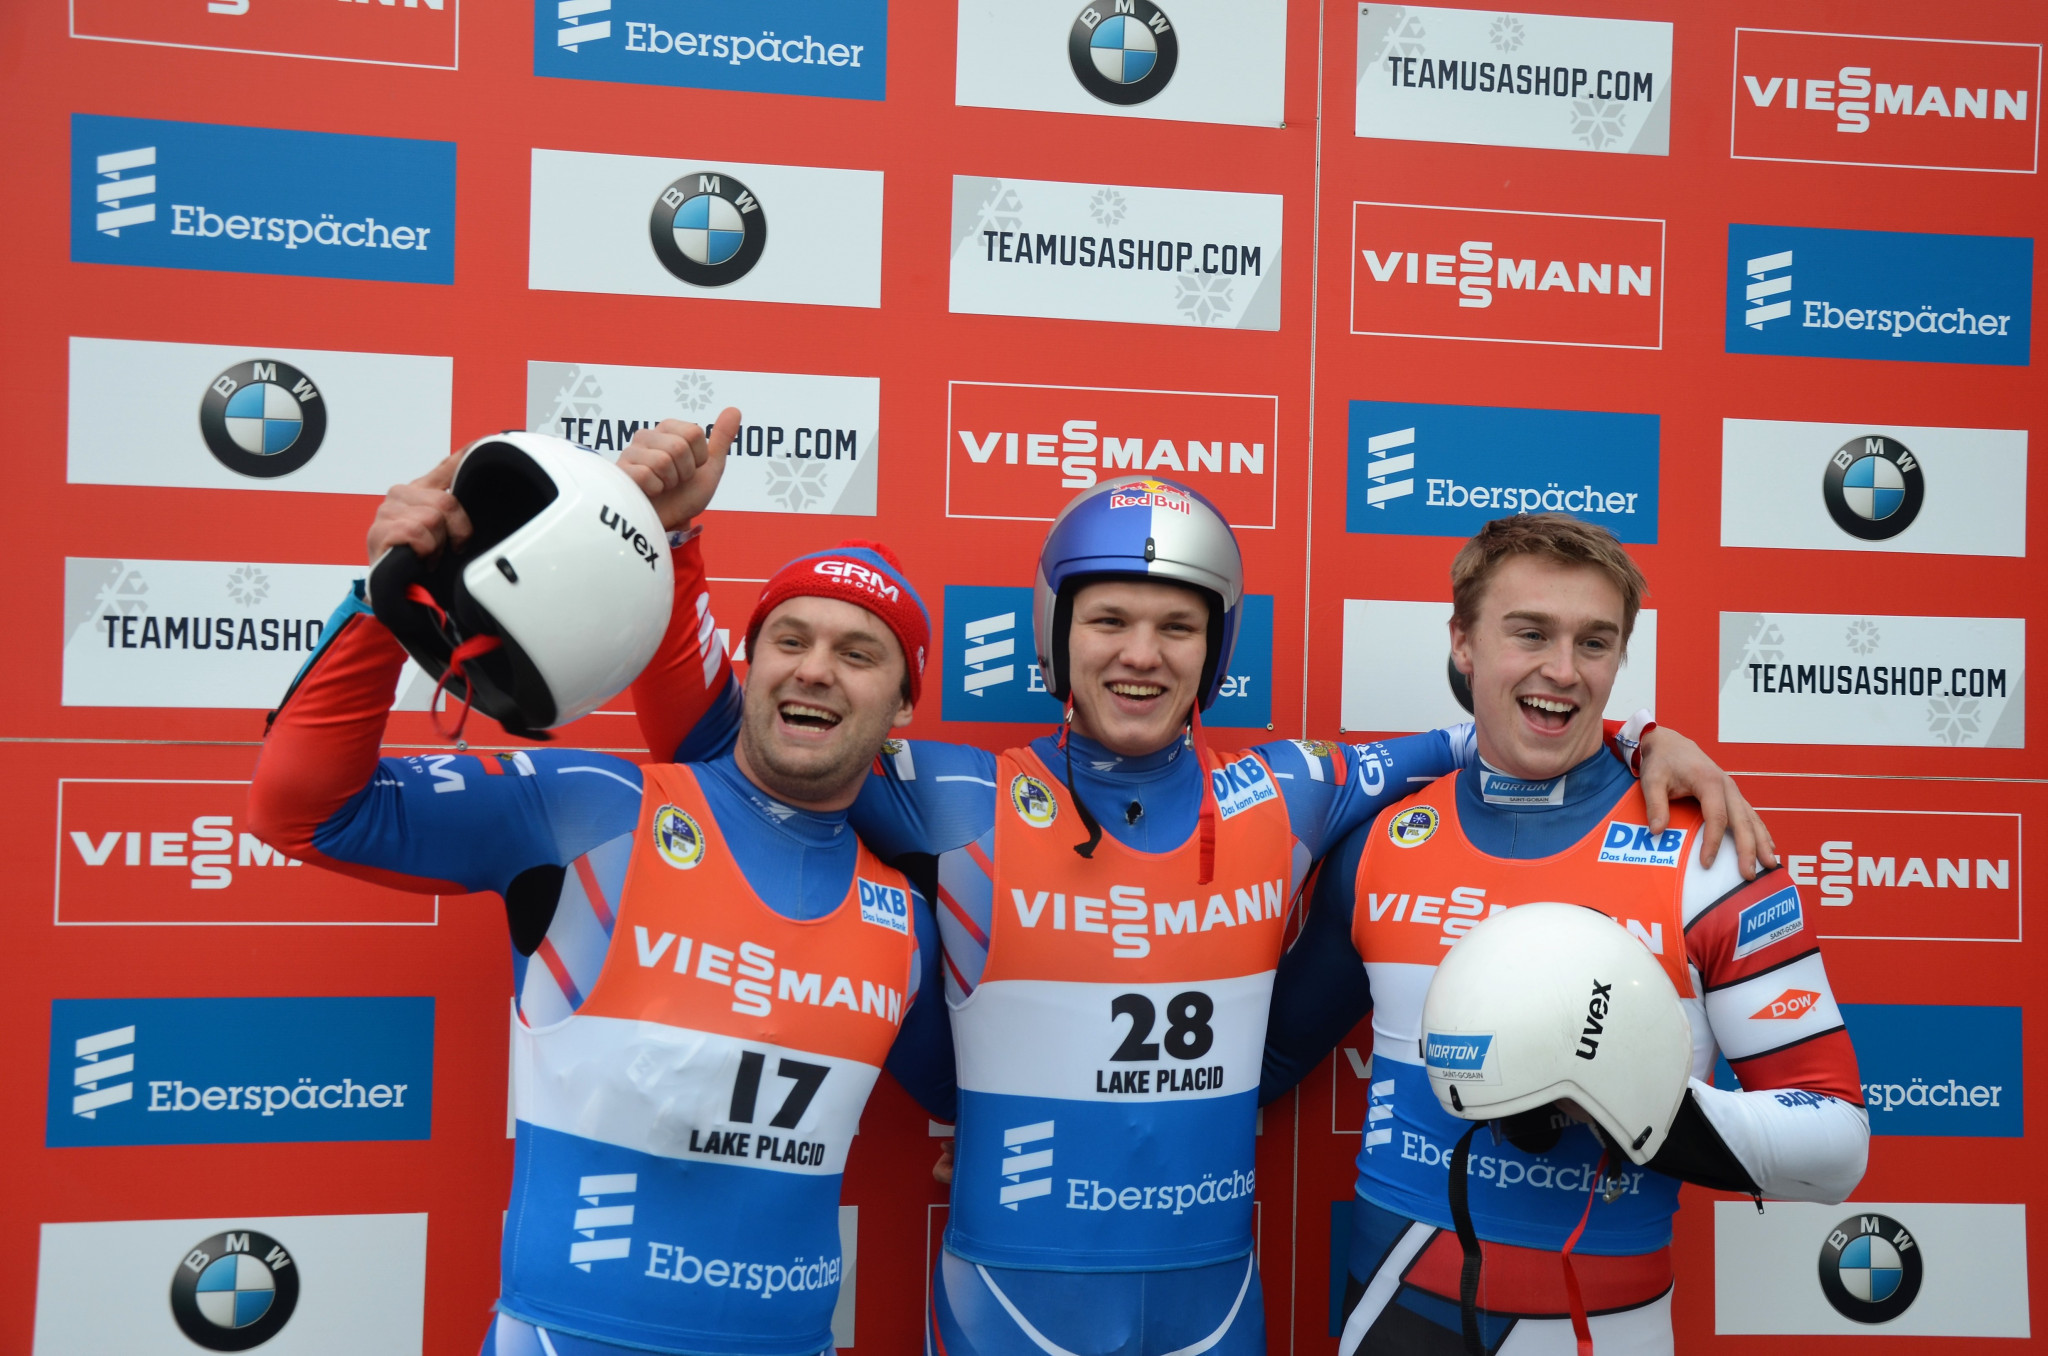 Roman Repilov, centre, recorded a record time on his way to victory in Lake Placid ©FIL